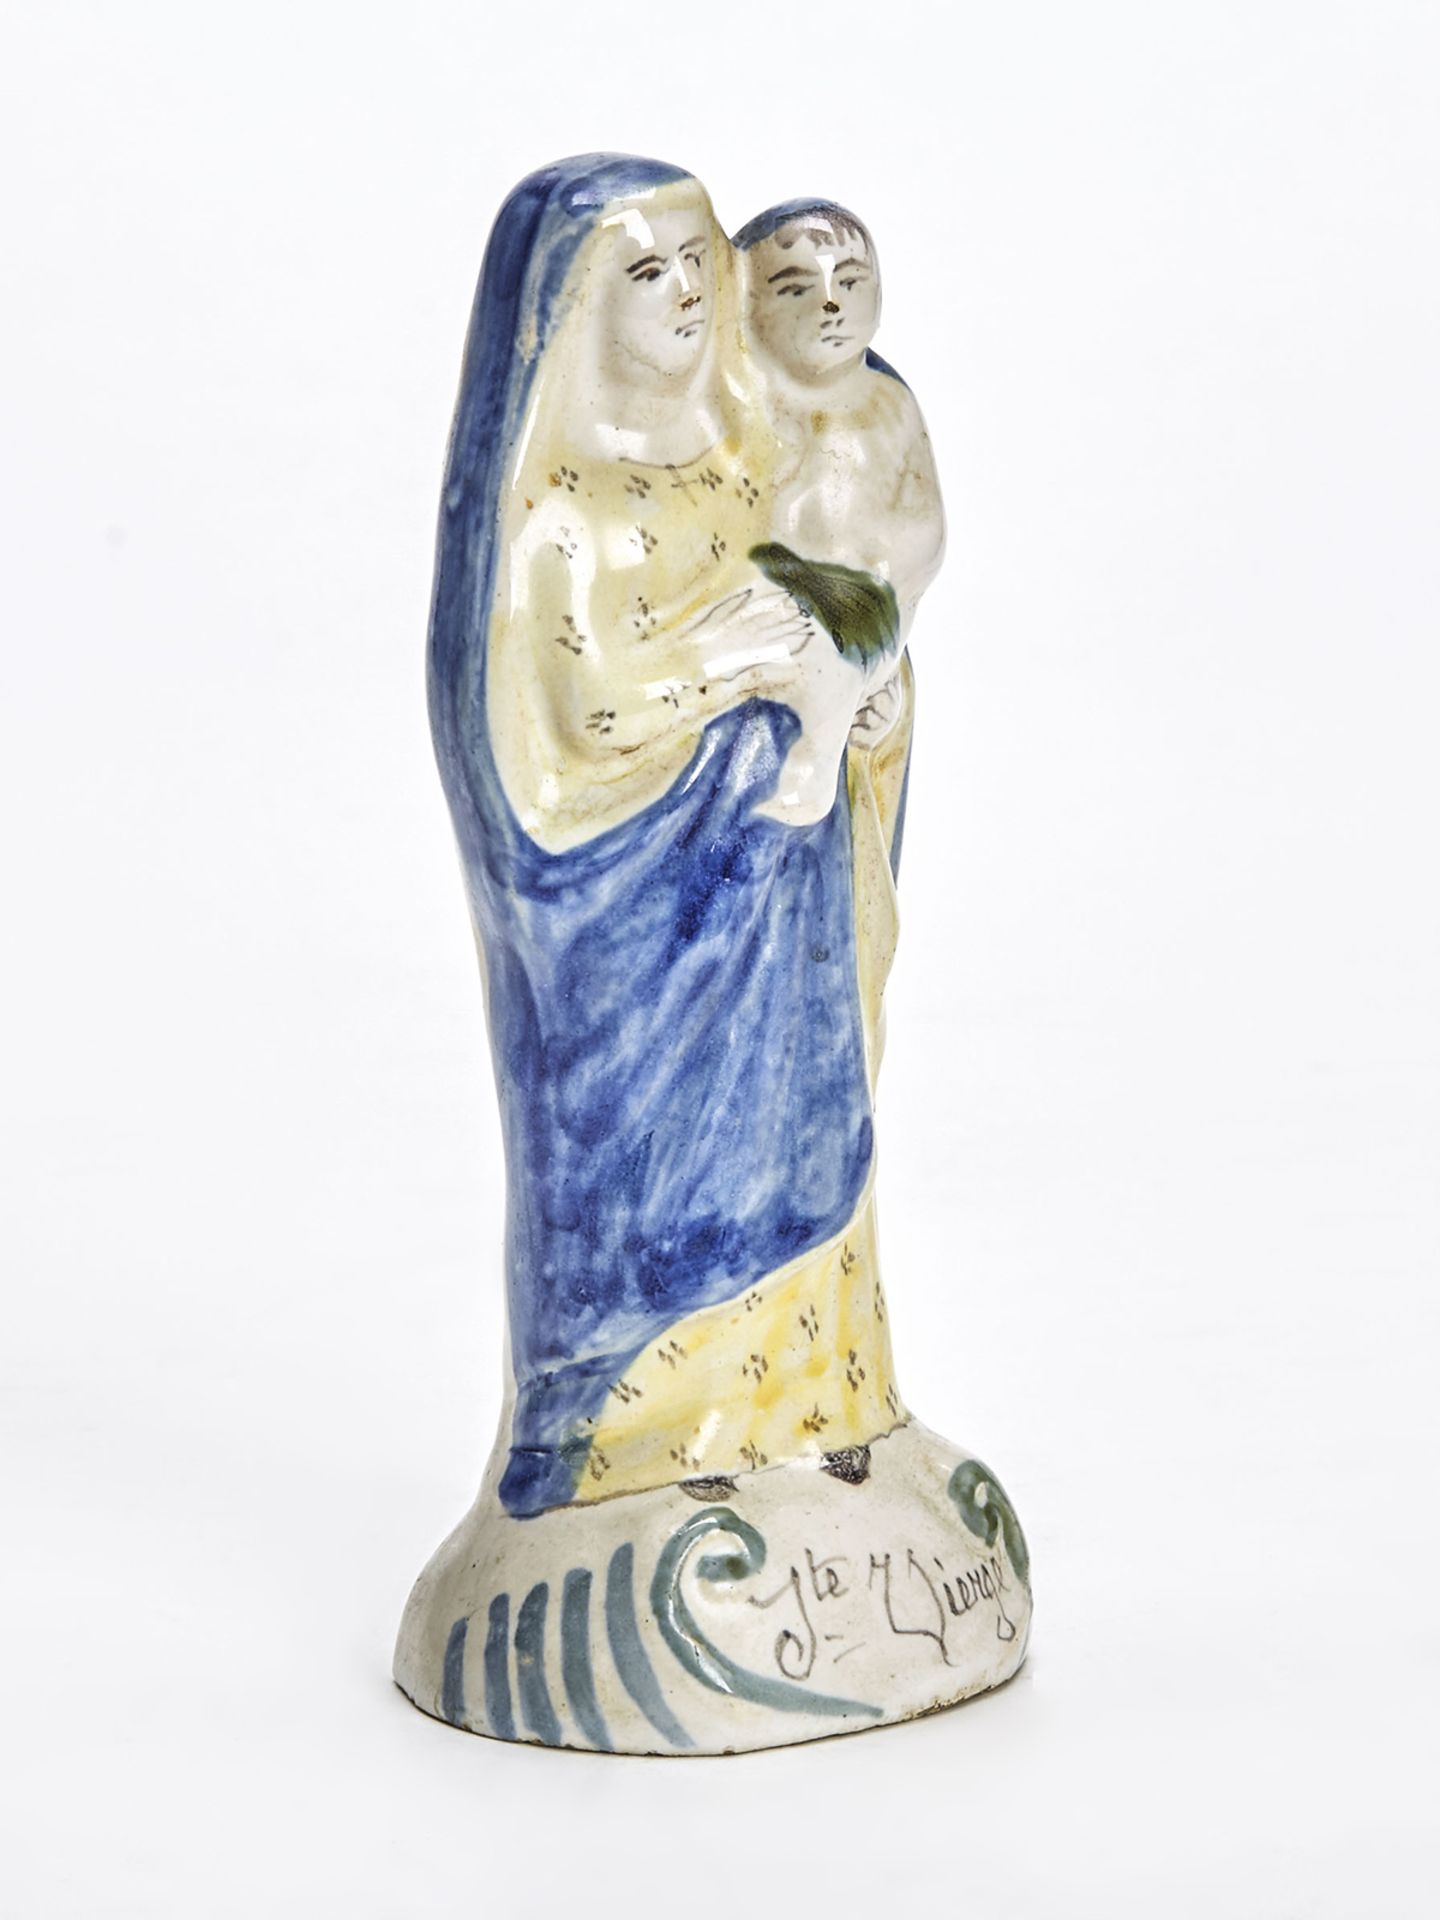 ANTIQUE FRENCH HENRIOT QUIMPER VIRGIN MARY FIGURE c.1900 - Image 3 of 7